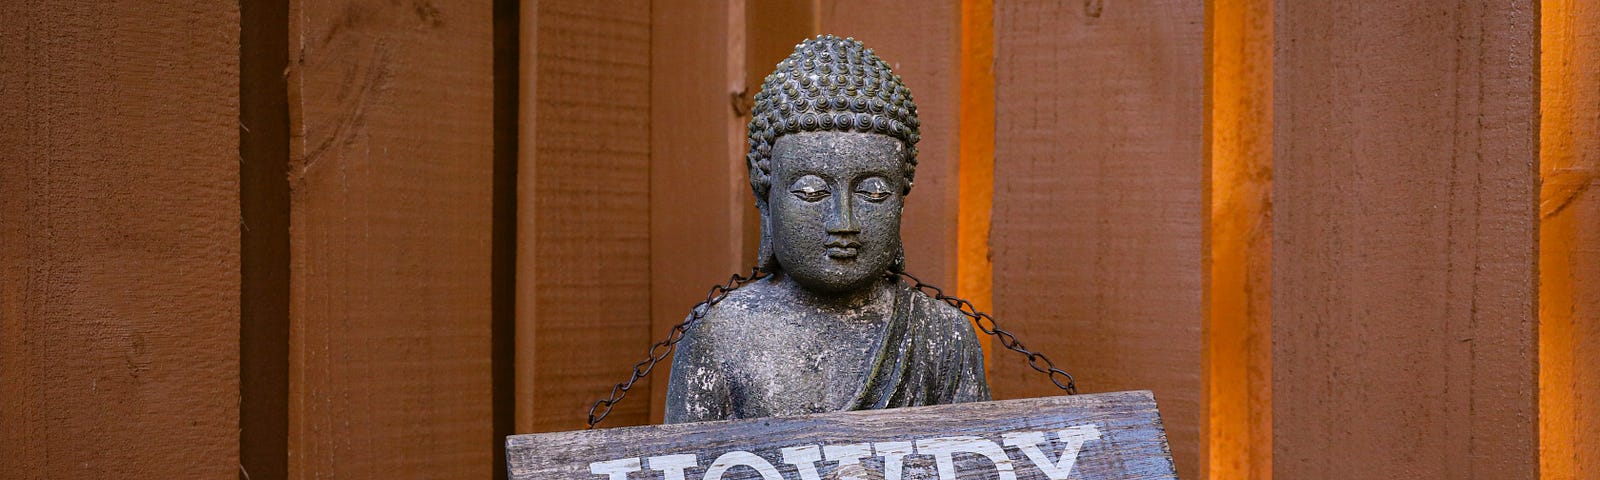 How are you? They ask. Calm like this Buddha or should I tell them the truth?